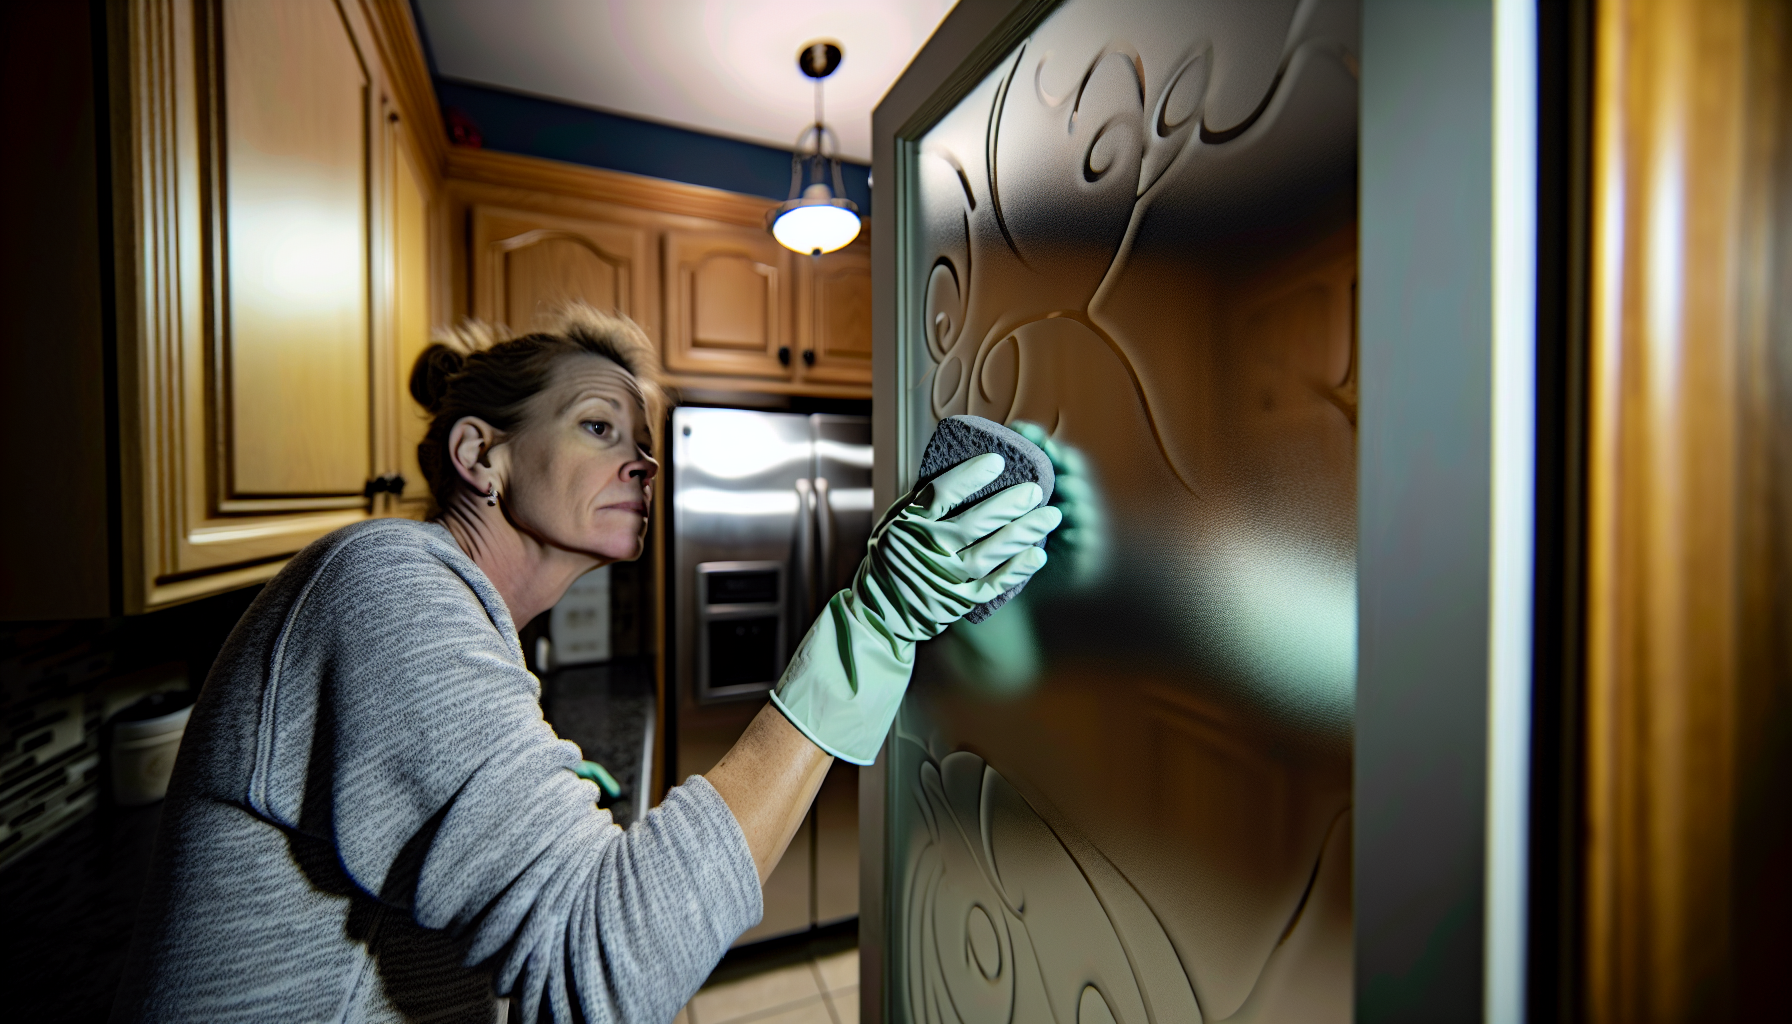 A person wearing rubber gloves and using a pumice stone to address tough stains on a frosted glass pantry door